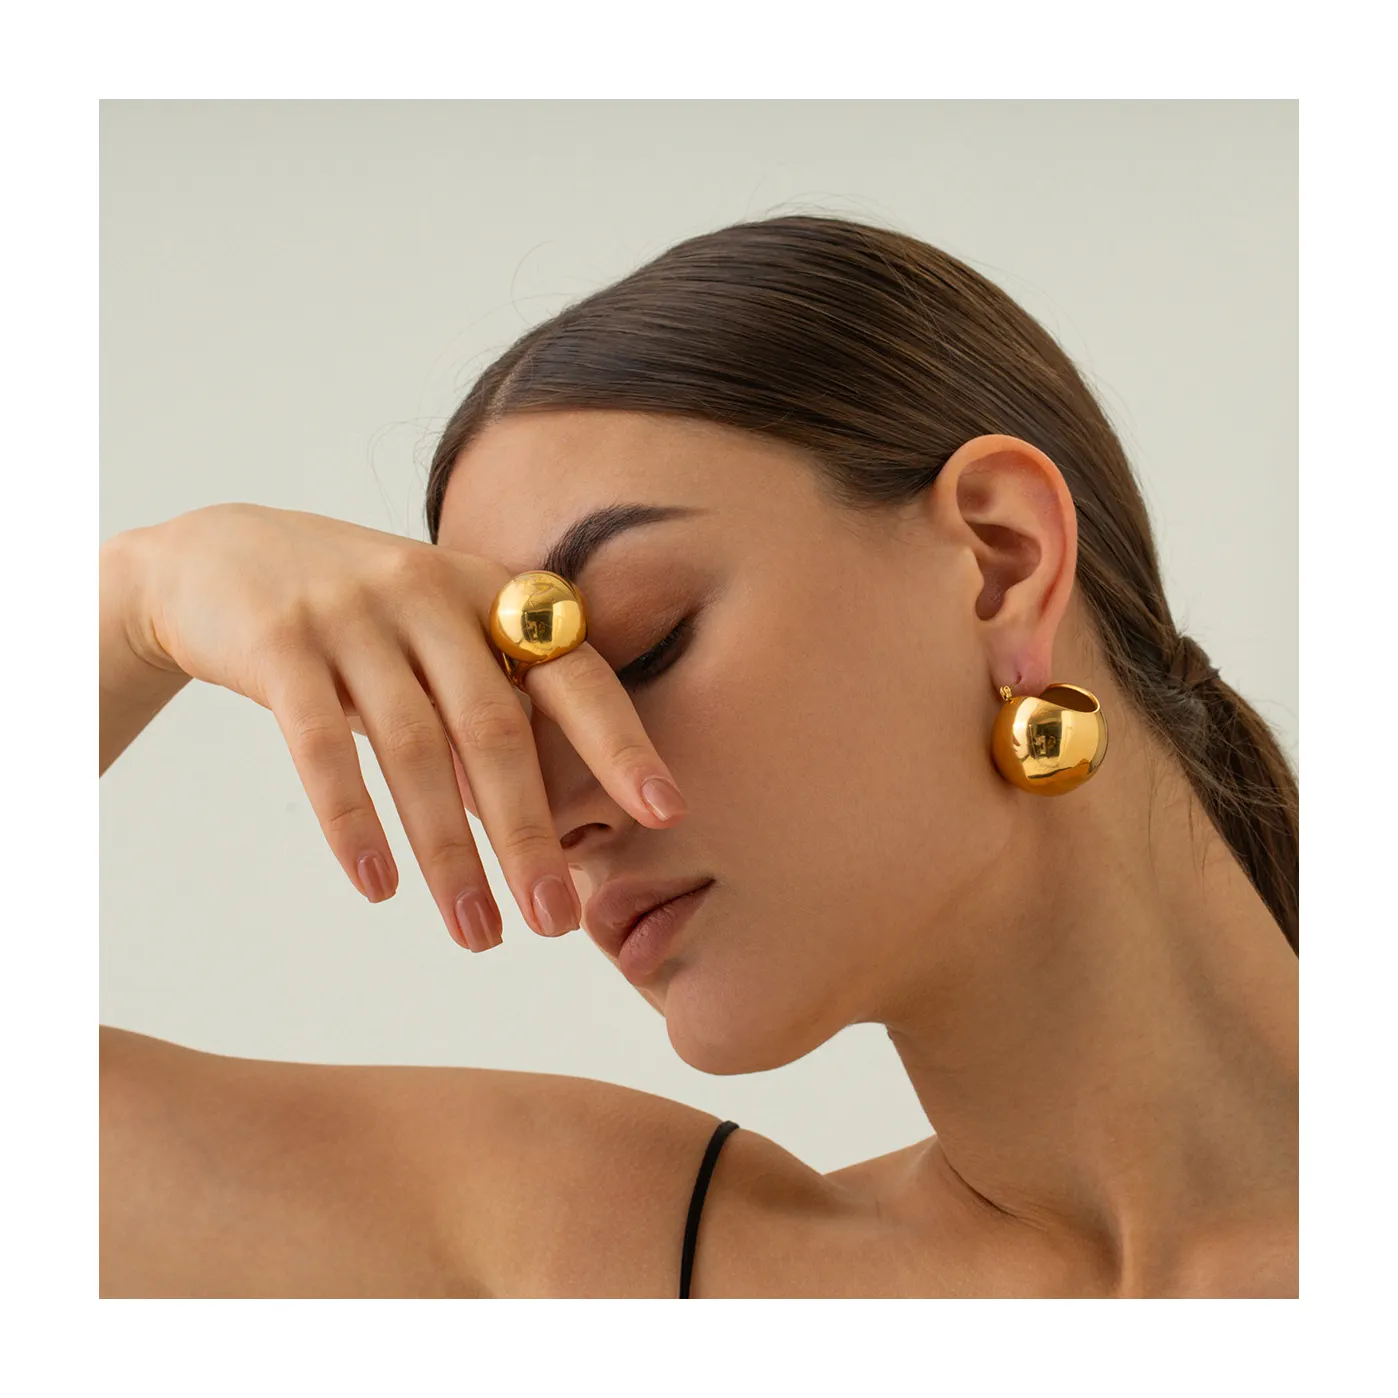 ERESI New Round Ball Style Earring 18K PVD Gold Jewelry Stainless Steel High Polish Smooth Geometric Simple Unisex Stud Earring